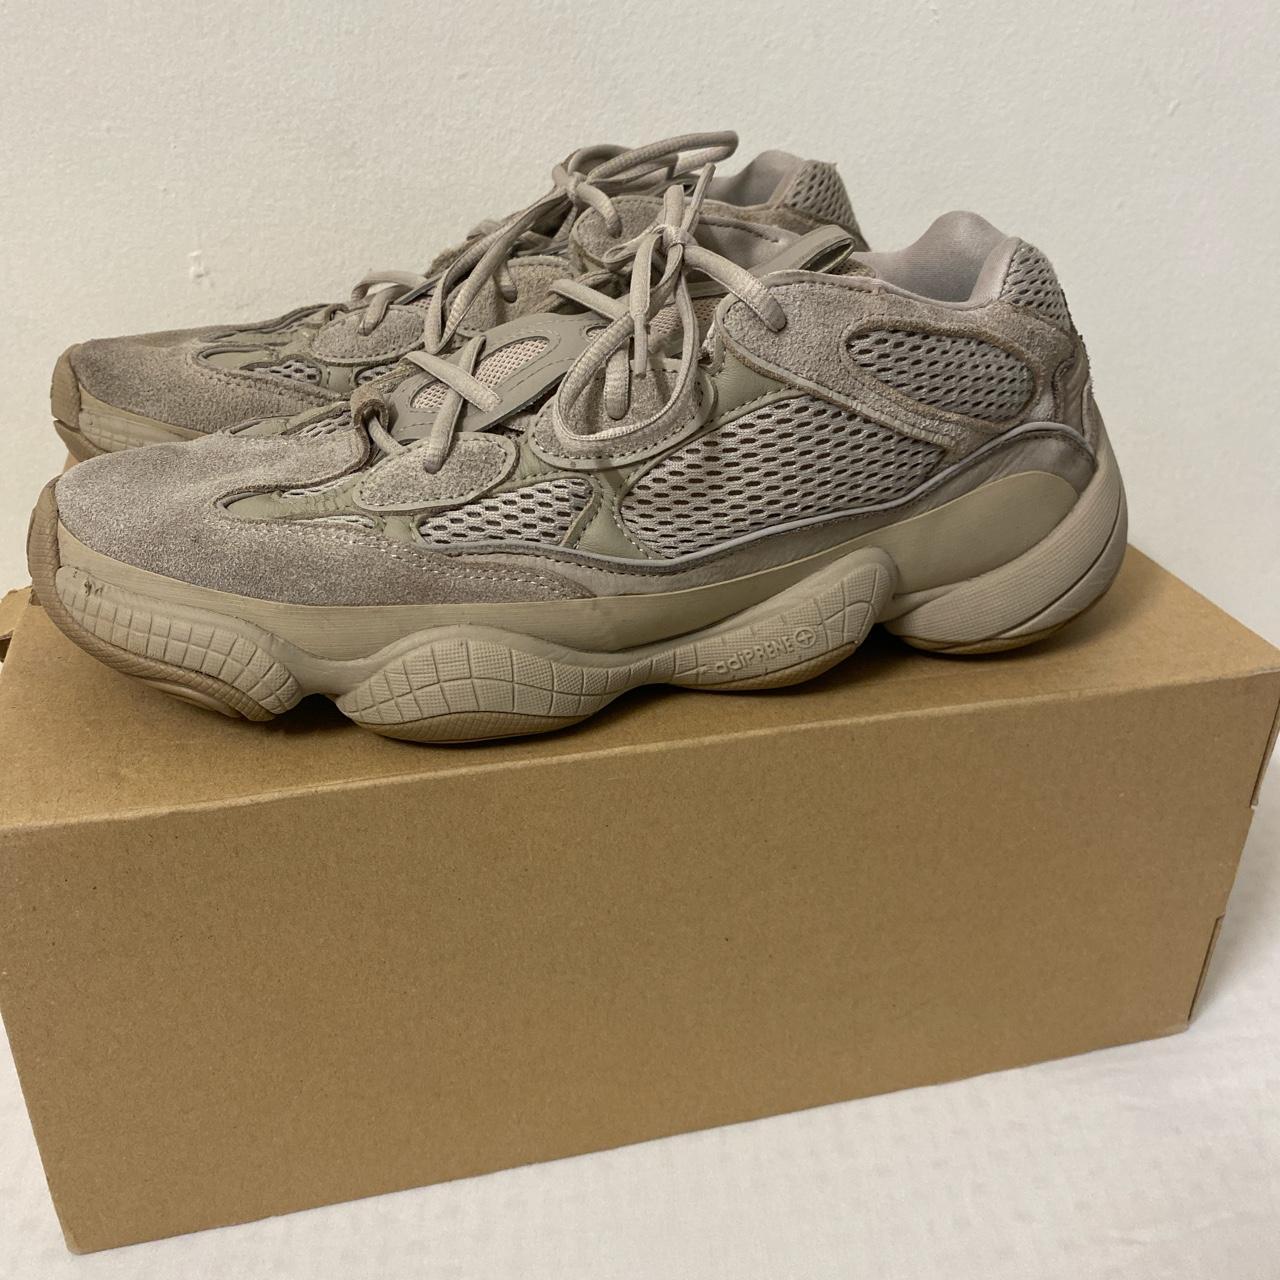 Yeezy 500 Taupe Light Size 11.5 Comes with box og... - Depop